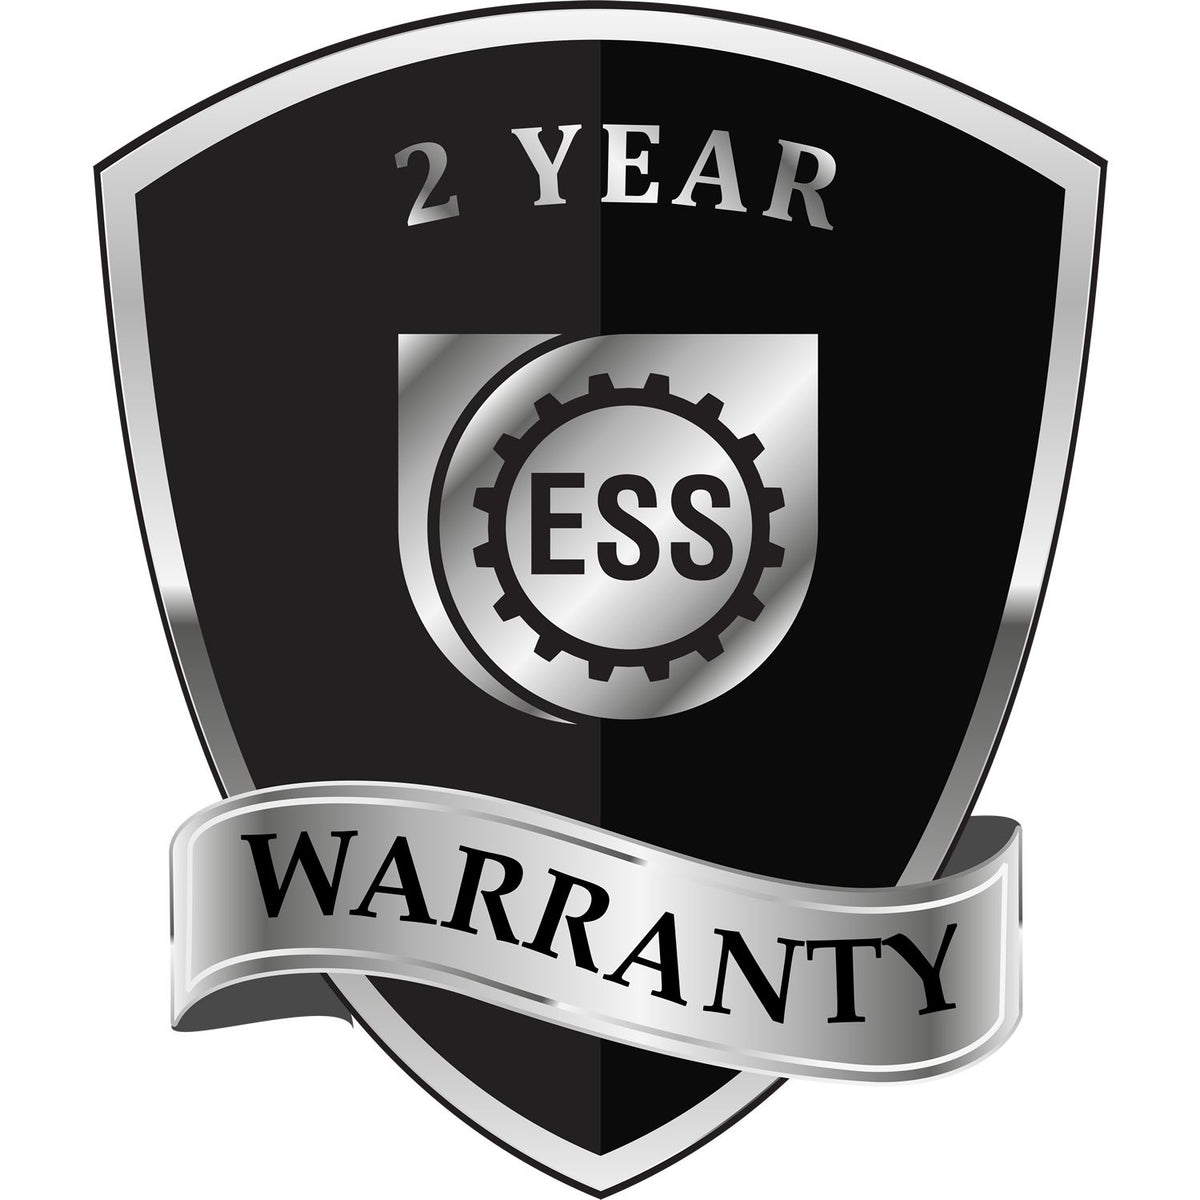 A black and silver badge or emblem showing warranty information for the Colorado Geologist Desk Seal